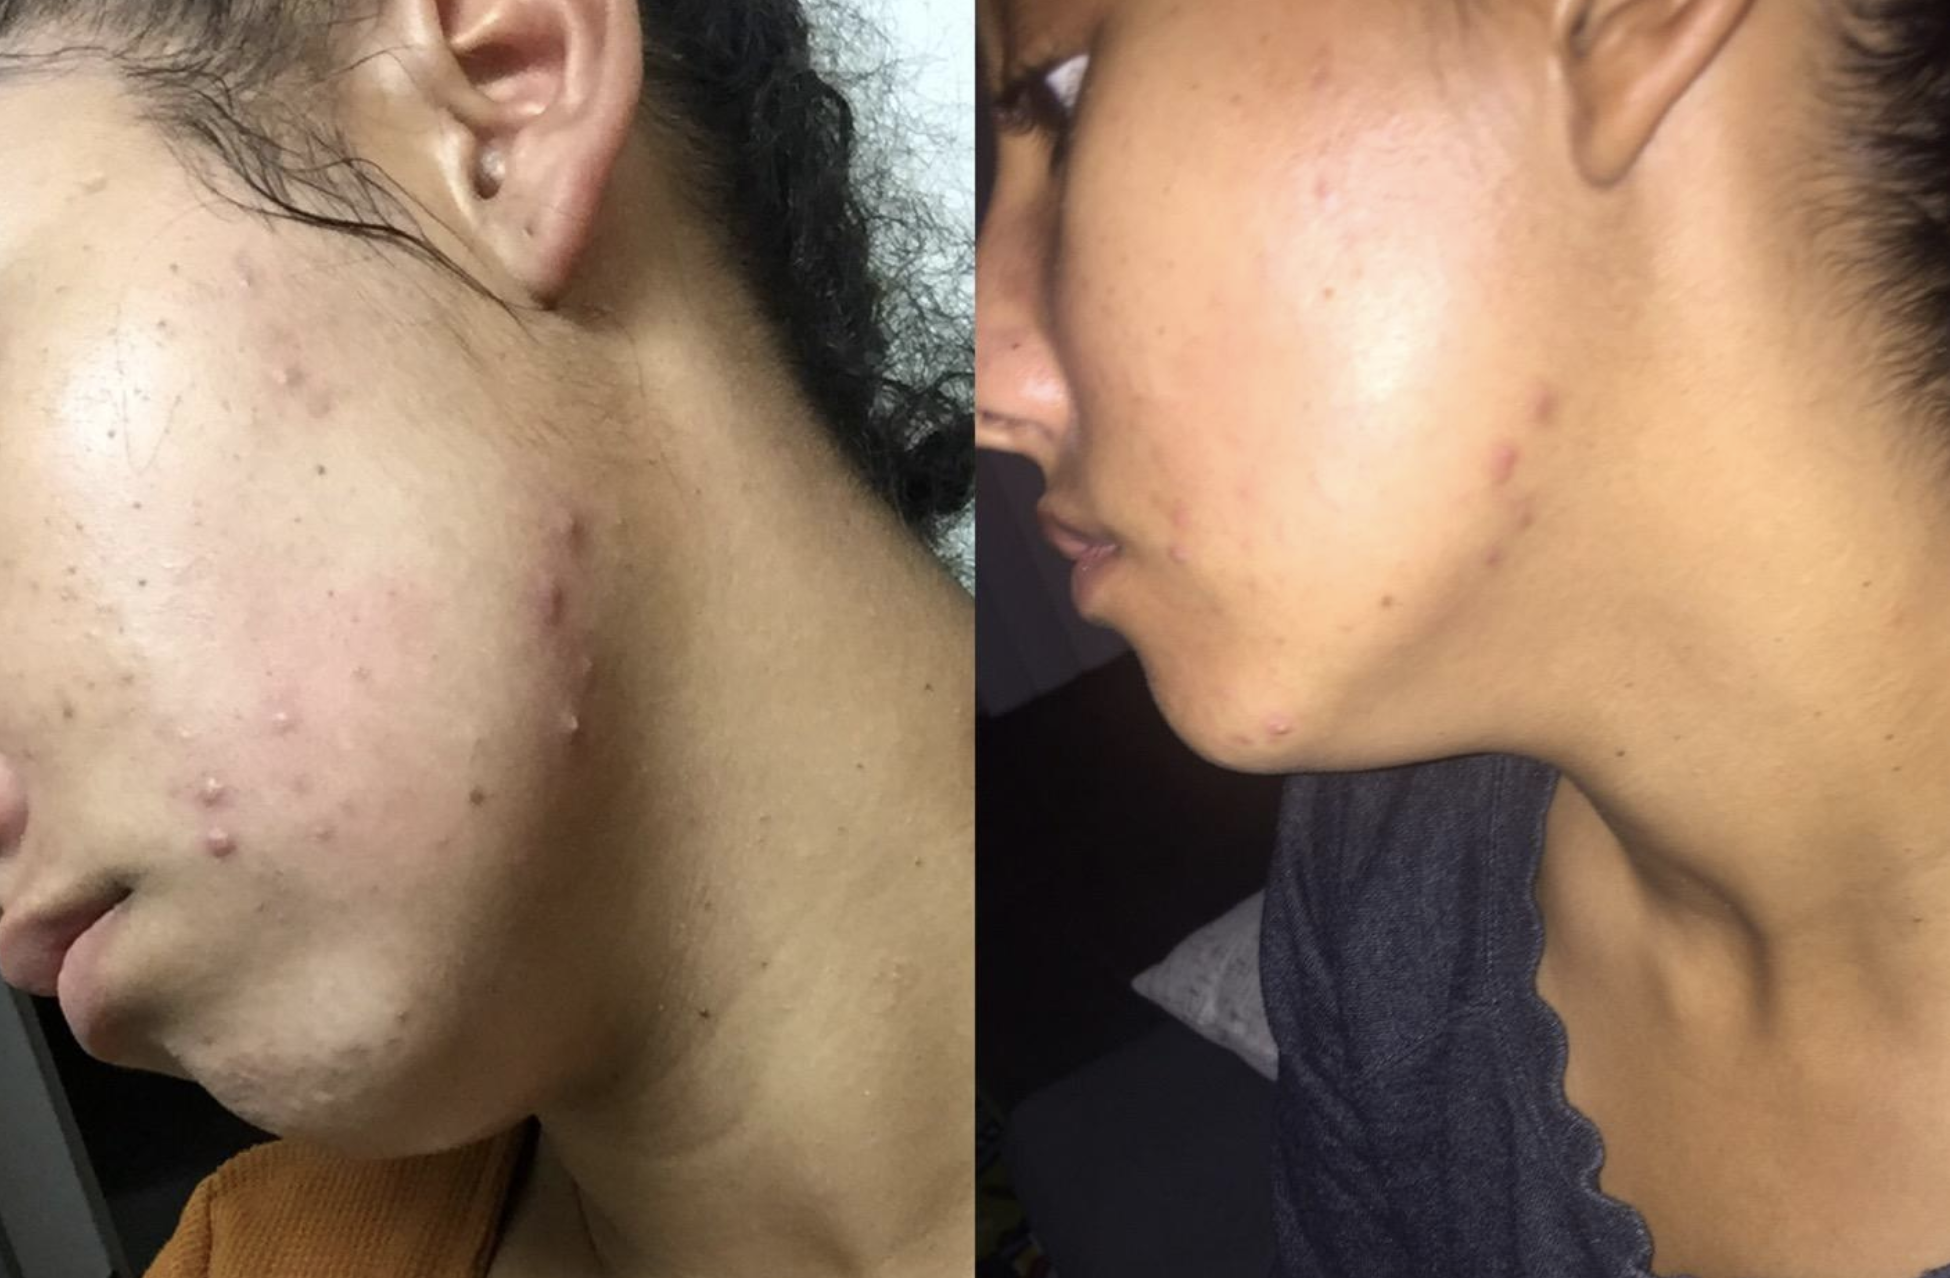 A reviewer&#x27;s jawline showing red breakouts on the left and the reviewer&#x27;s jawline showing the breakouts have diminished in size and appearance on the right